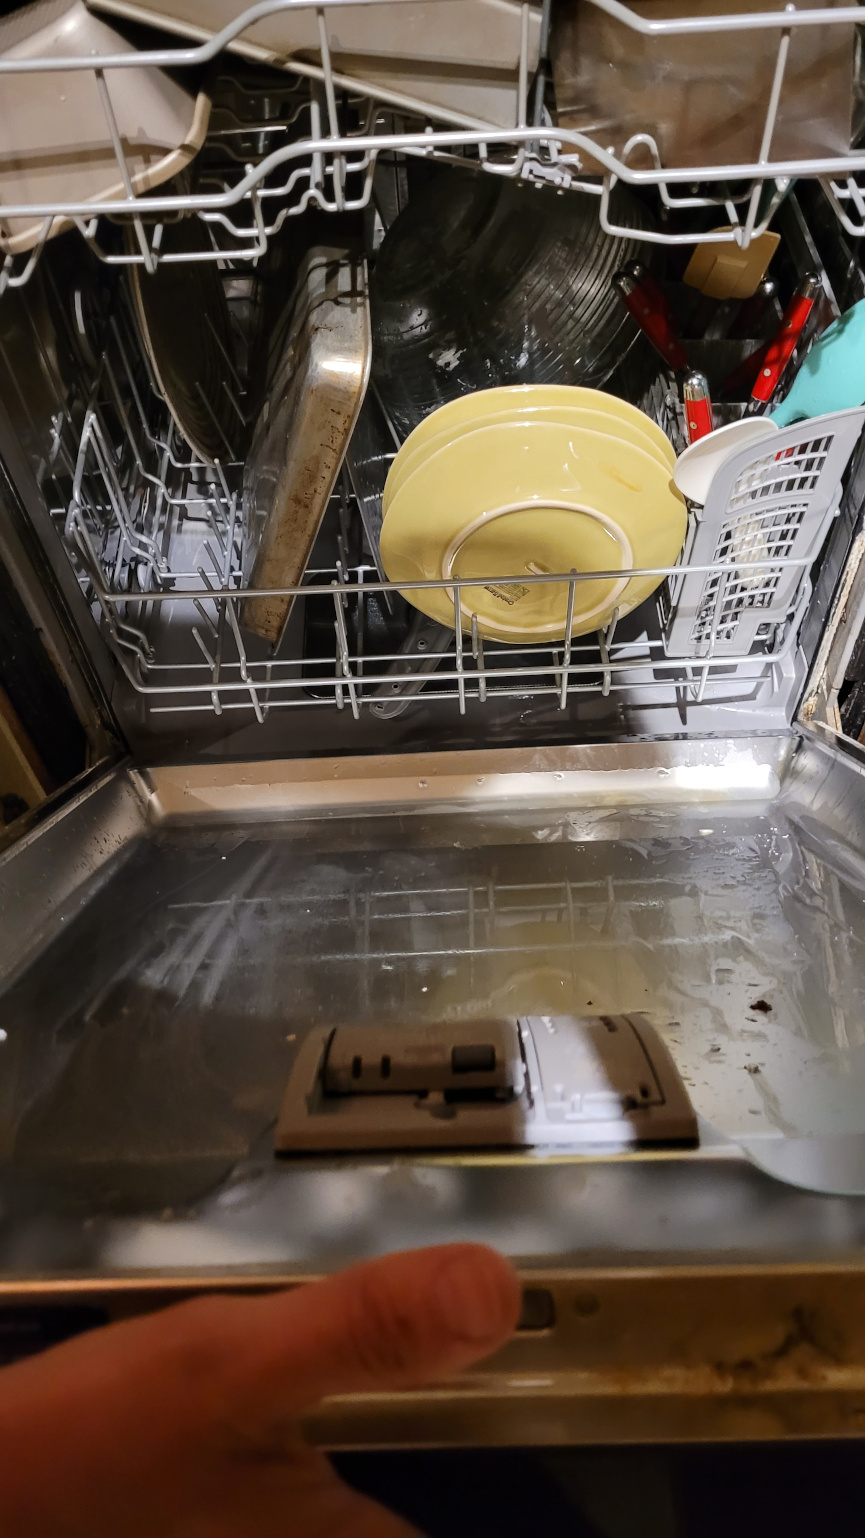 a loaded dishwasher being closed